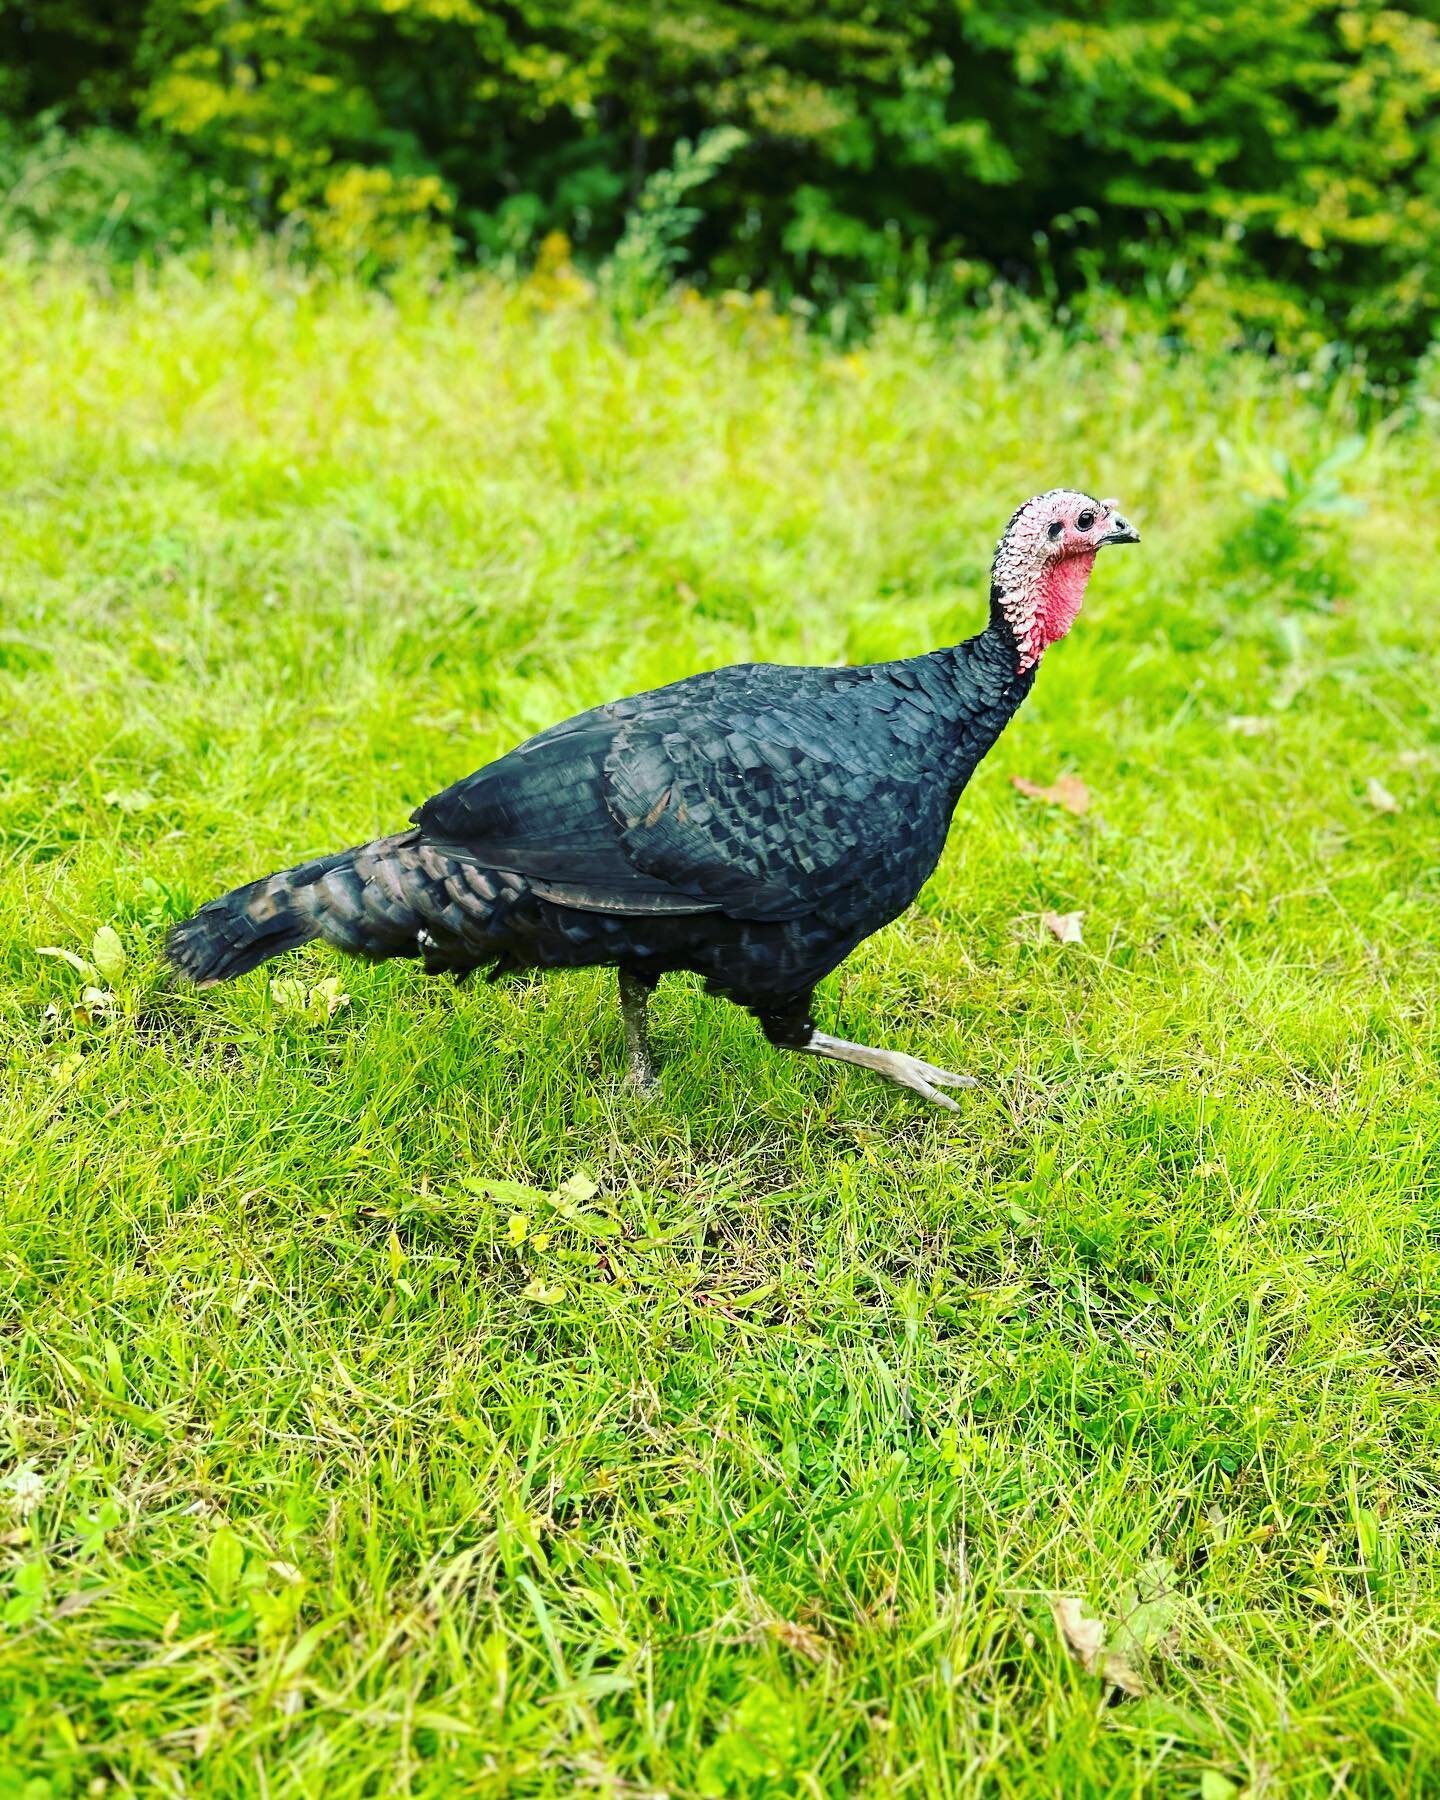 Turkeys are growing great! Which is your favorite - artisan black? Broad breasted bronze? Midget or giant white? We also have heritage breeds Narragansett and blue slate. Soooo much better than the commercial breeds! Get your order in today.